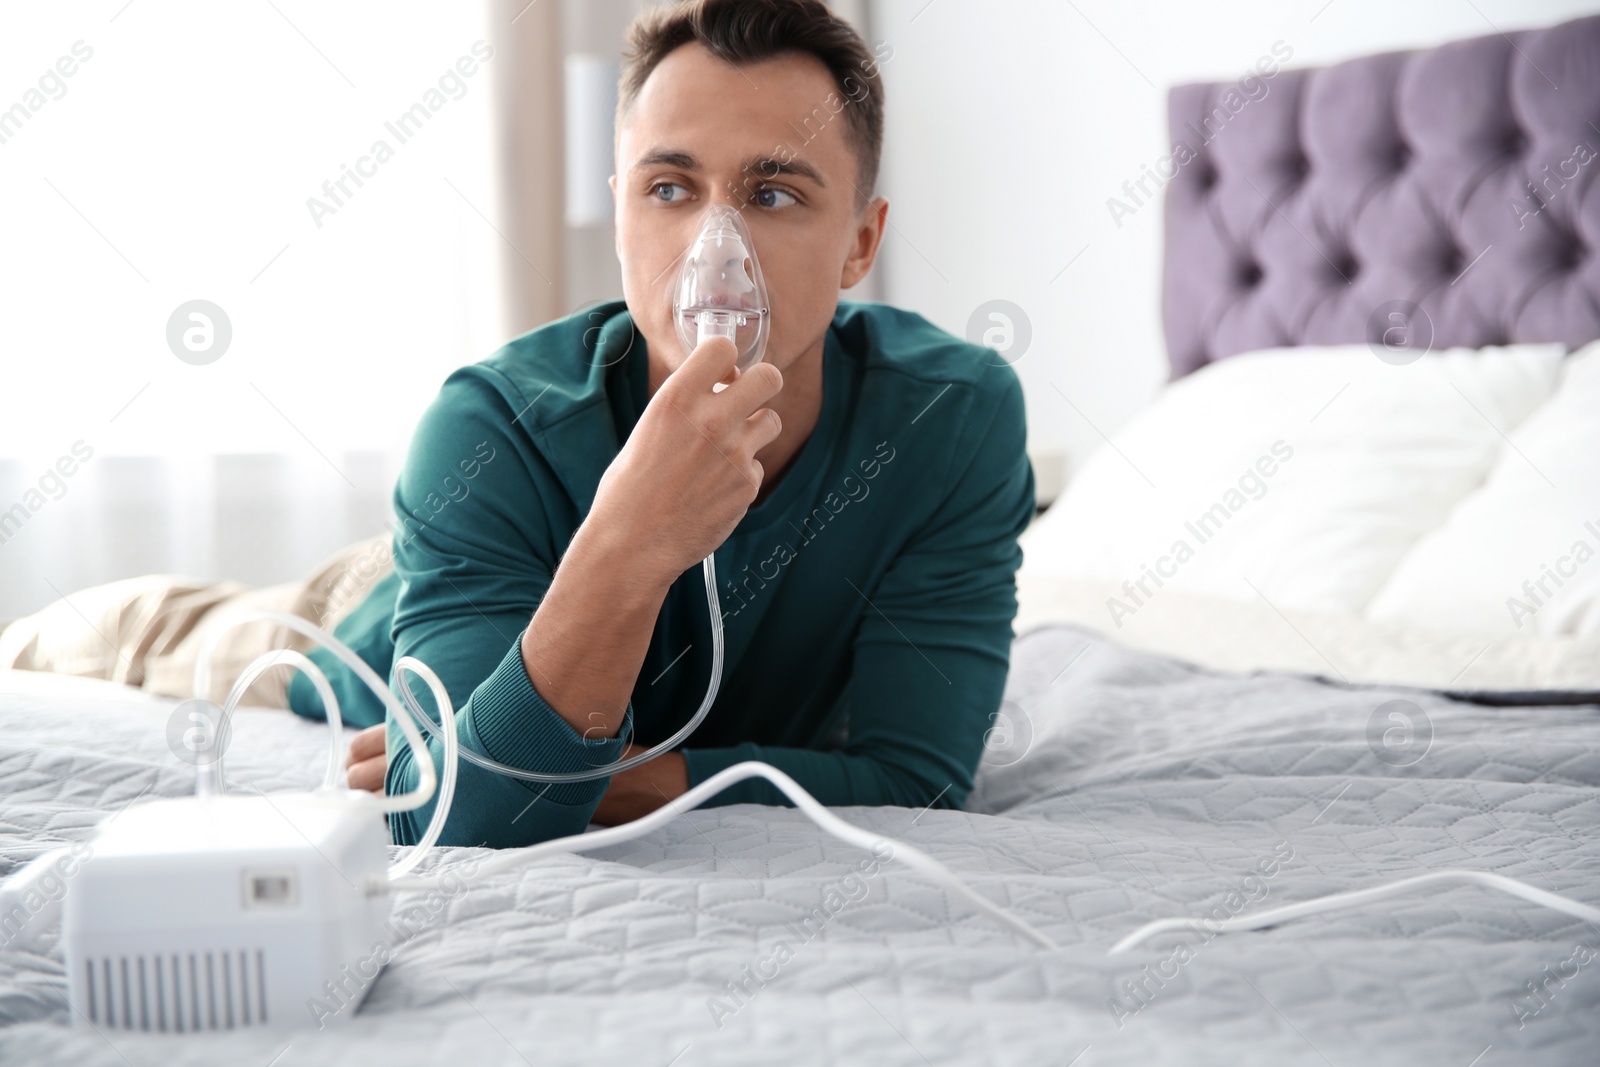 Photo of Young man with asthma machine on bed in light room